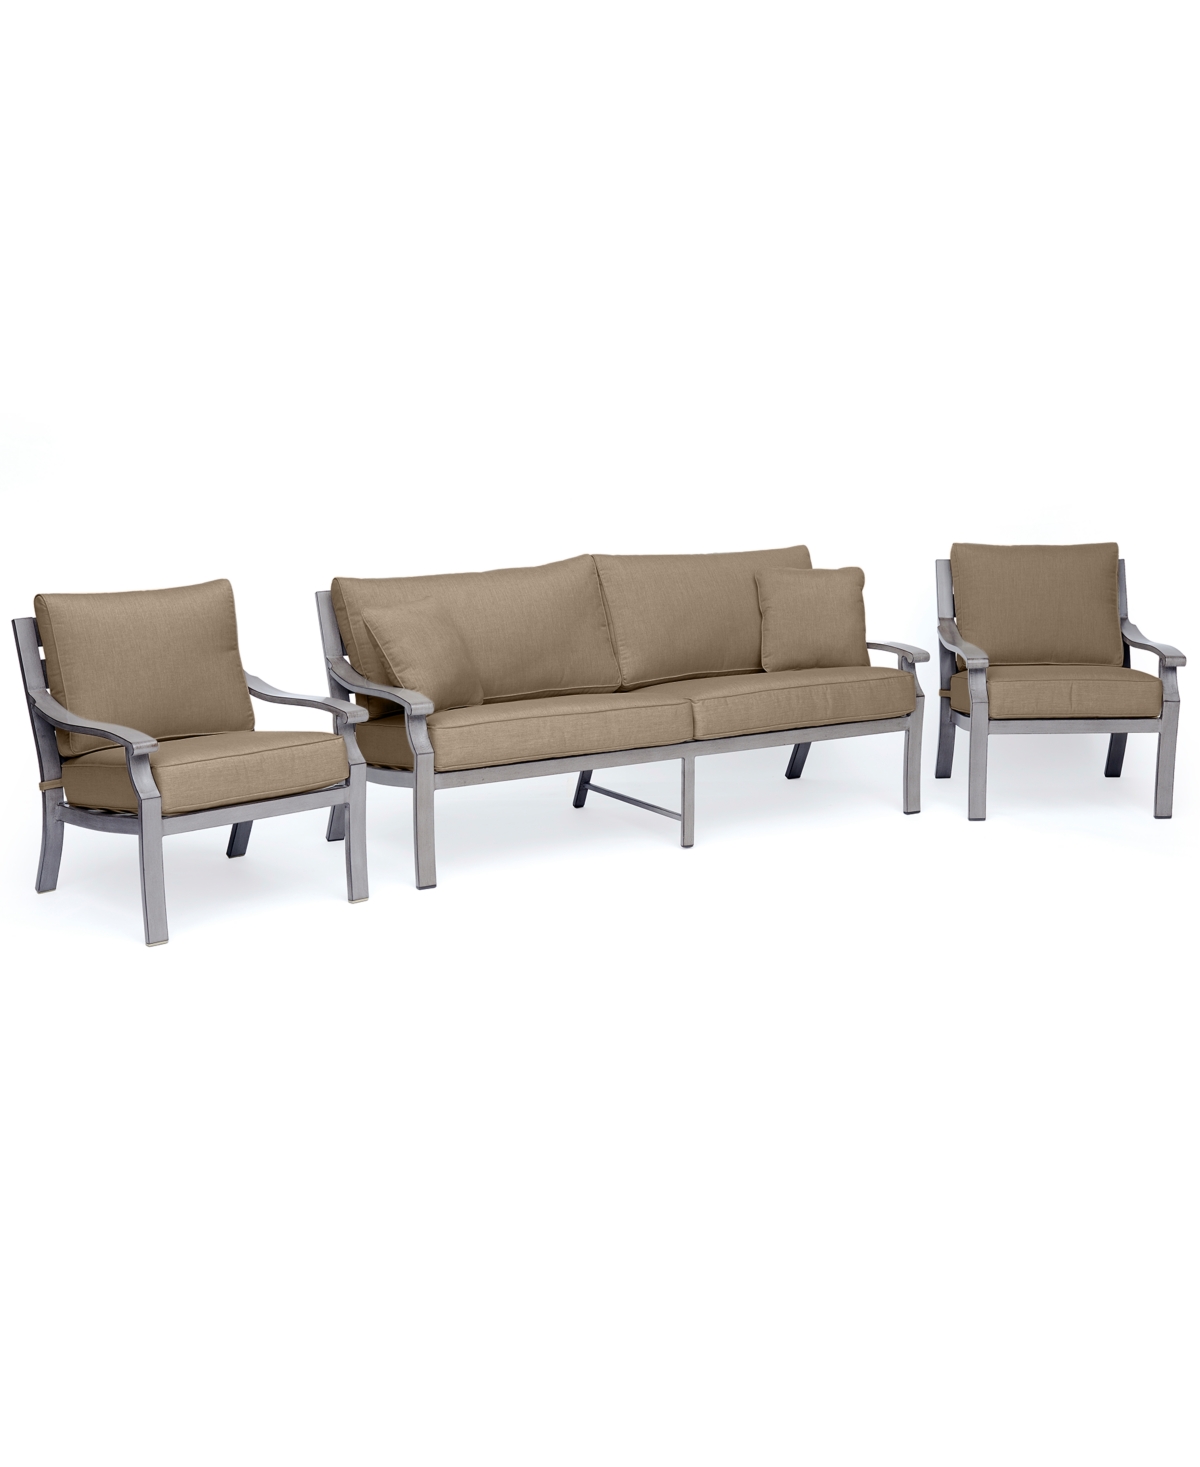 Agio Tara Aluminum Outdoor 3-pc. Seating Set (1 Sofa & 2 Rocker Chairs), Created For Macy's In Outdura Remy Pebble